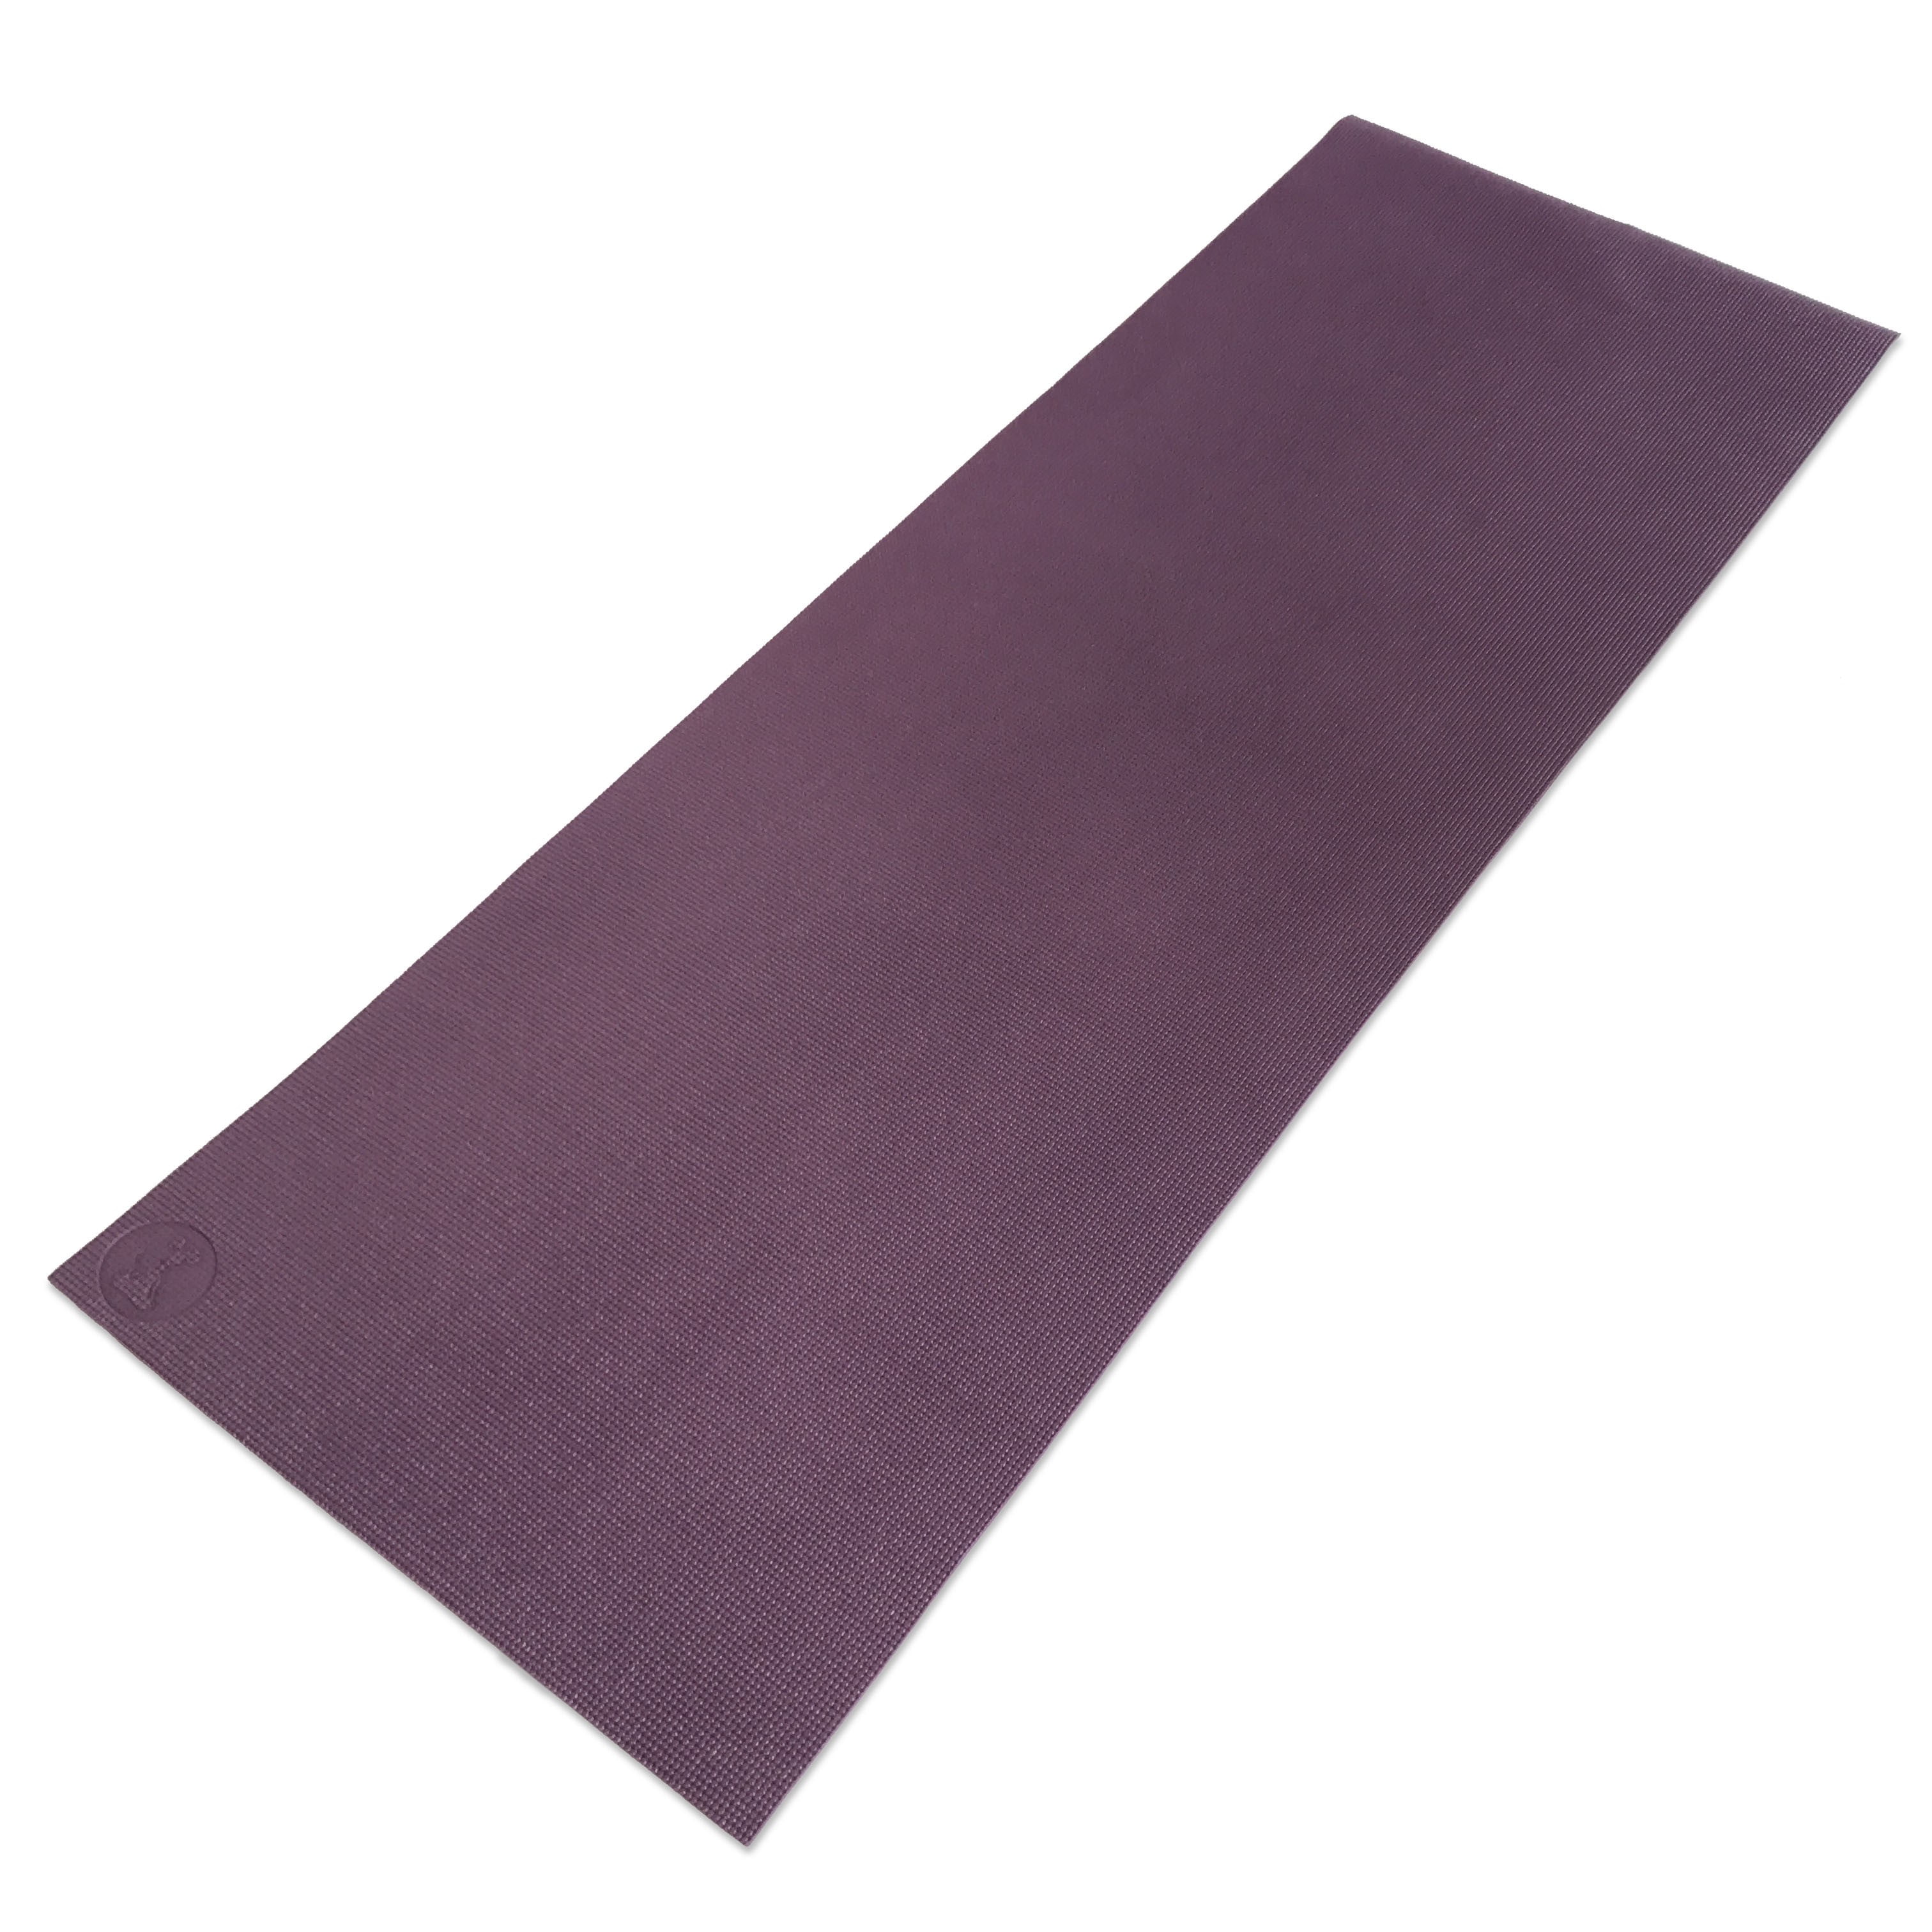 RatMat PRINTED YOGA MAT: Eco-friendly, nontoxic foam construction.  Extra-thick and durable. 24 x 68 x 1/4 - Buy Online - 10143247